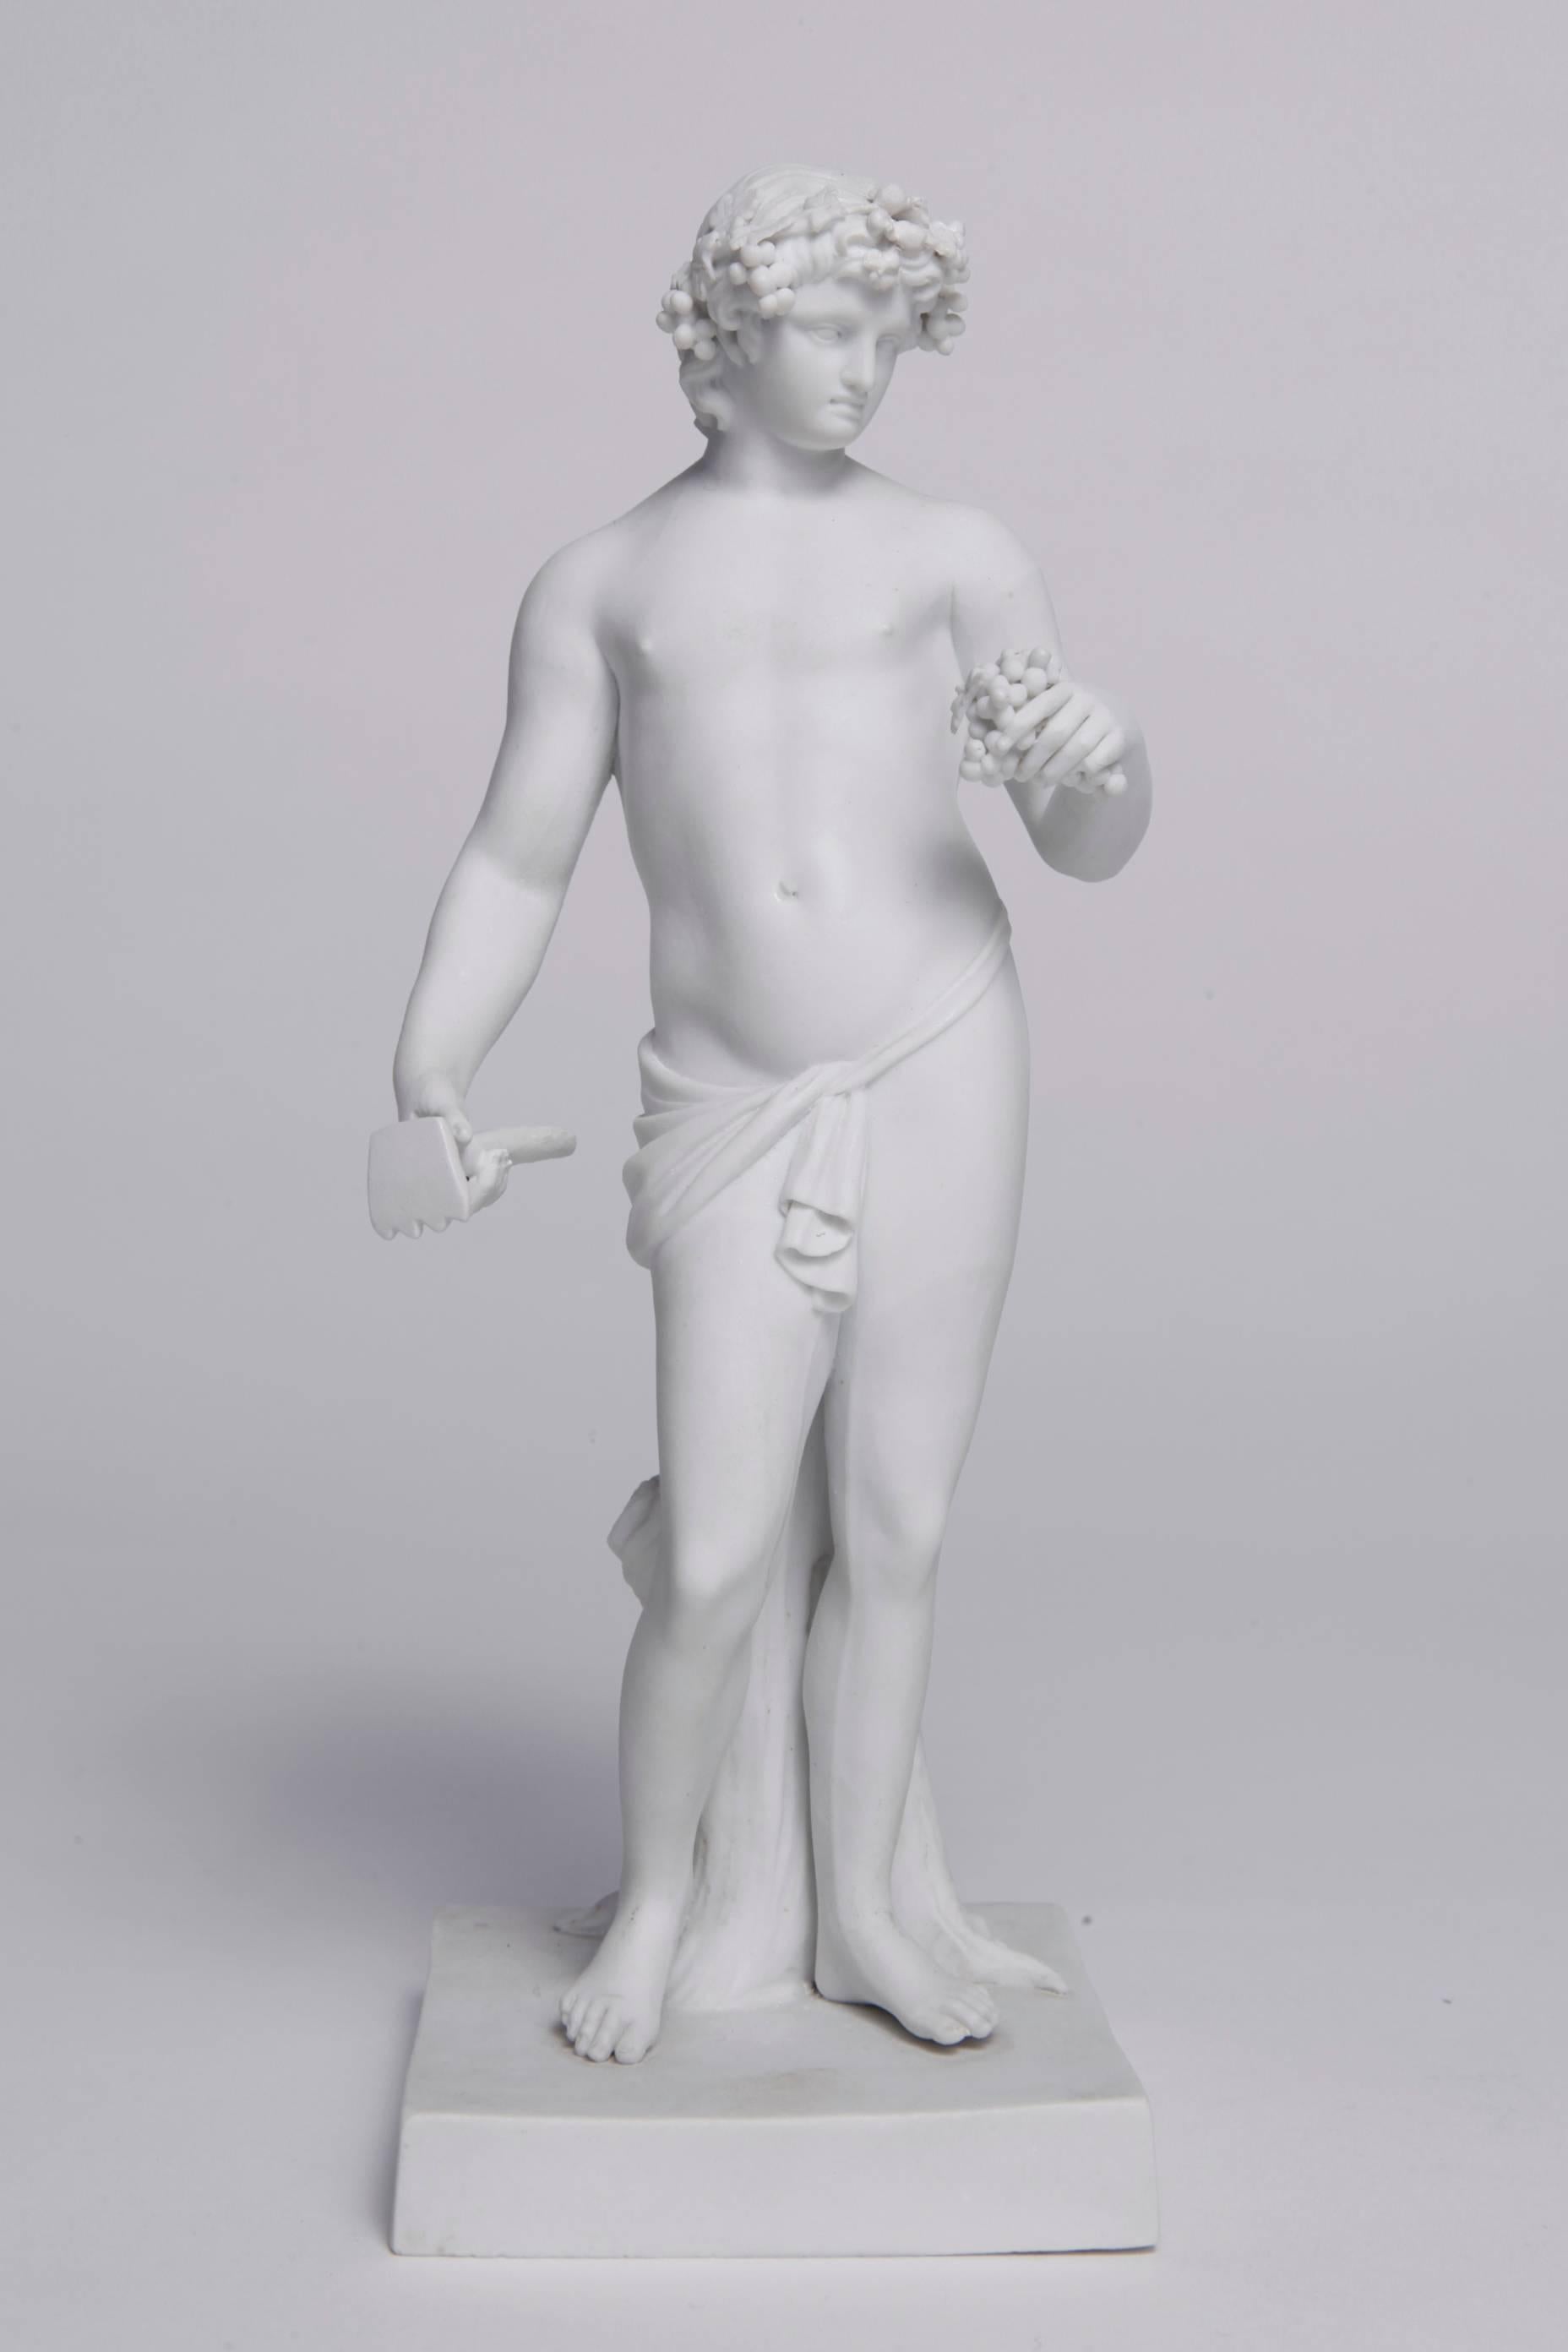 Greek mythological figure of Dionysos, the god of the grape harvest. Youthful sensual portrayal of dionysus, beardless, holding grapes and staff. 

Meissen, Marcolini period (1774-1814).

The Meissen Marcolini period is sought after by